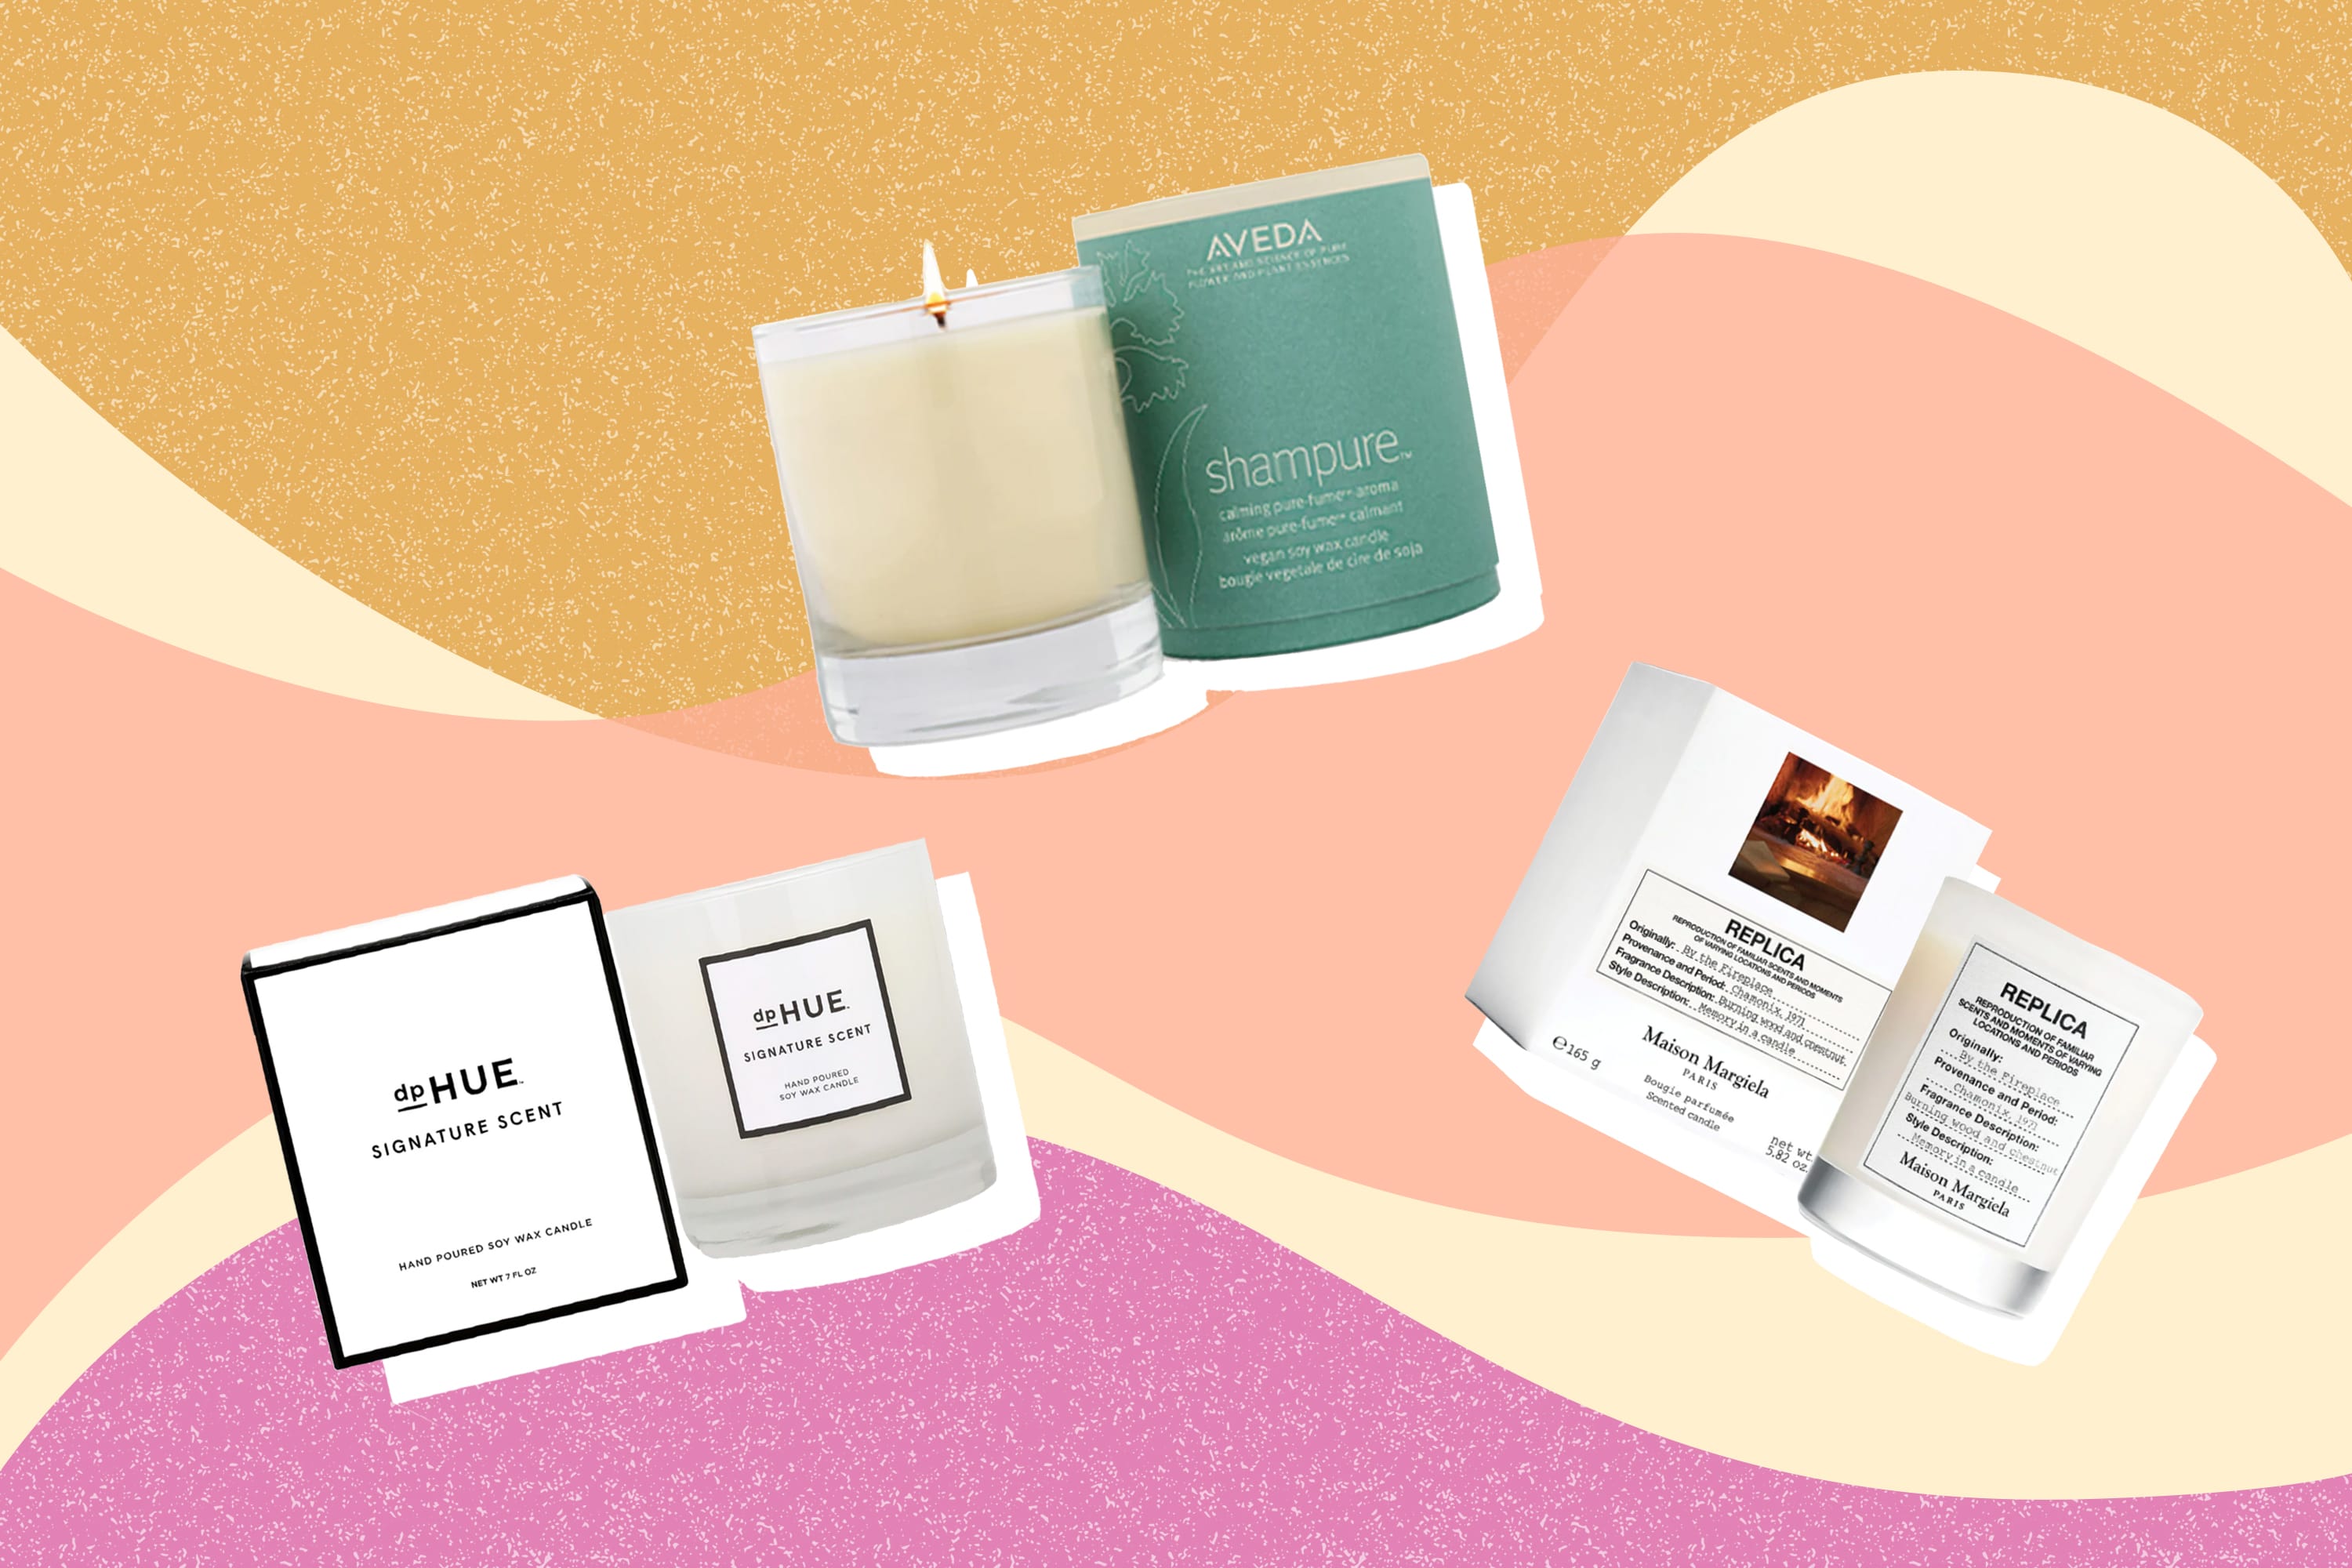 20 absolute last minute gift ideas for her: Candles, skincare, more 